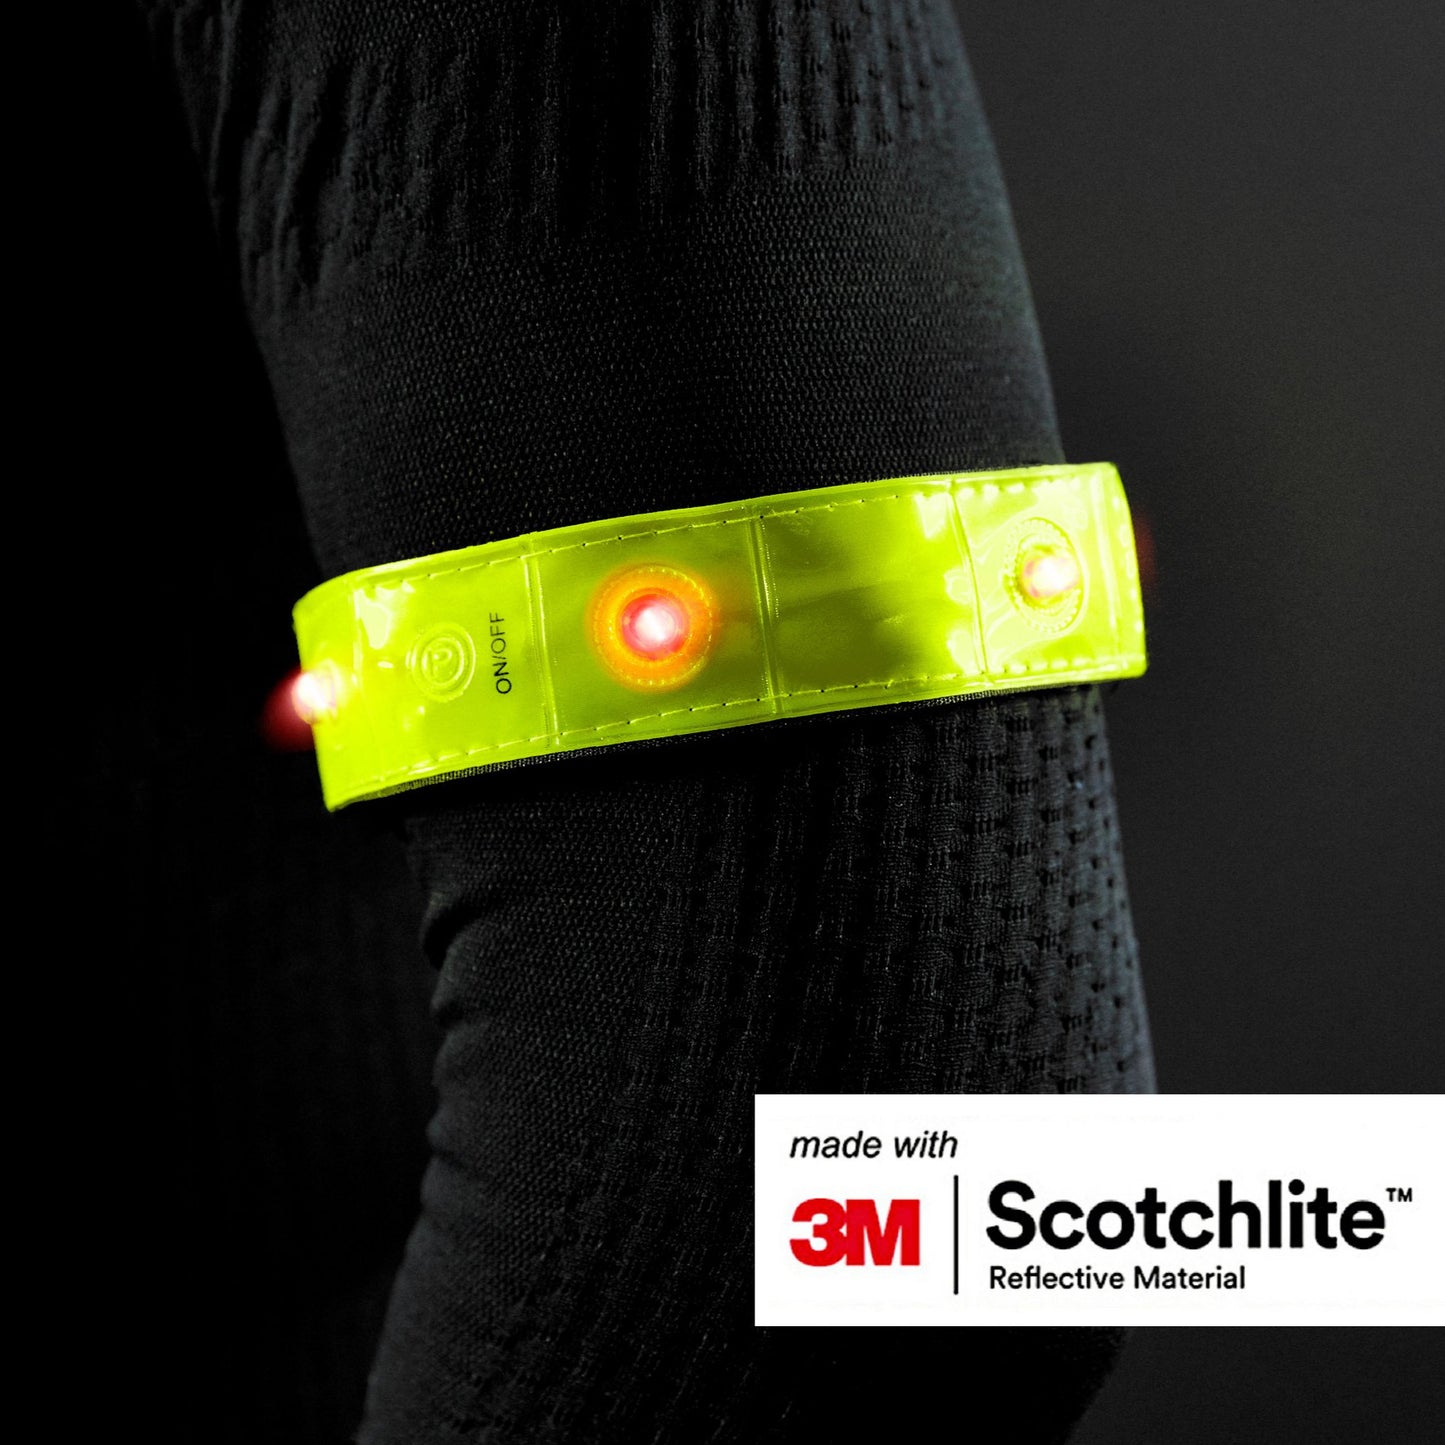 Close-up of persons arm wearing the reflective band with lights turned on.